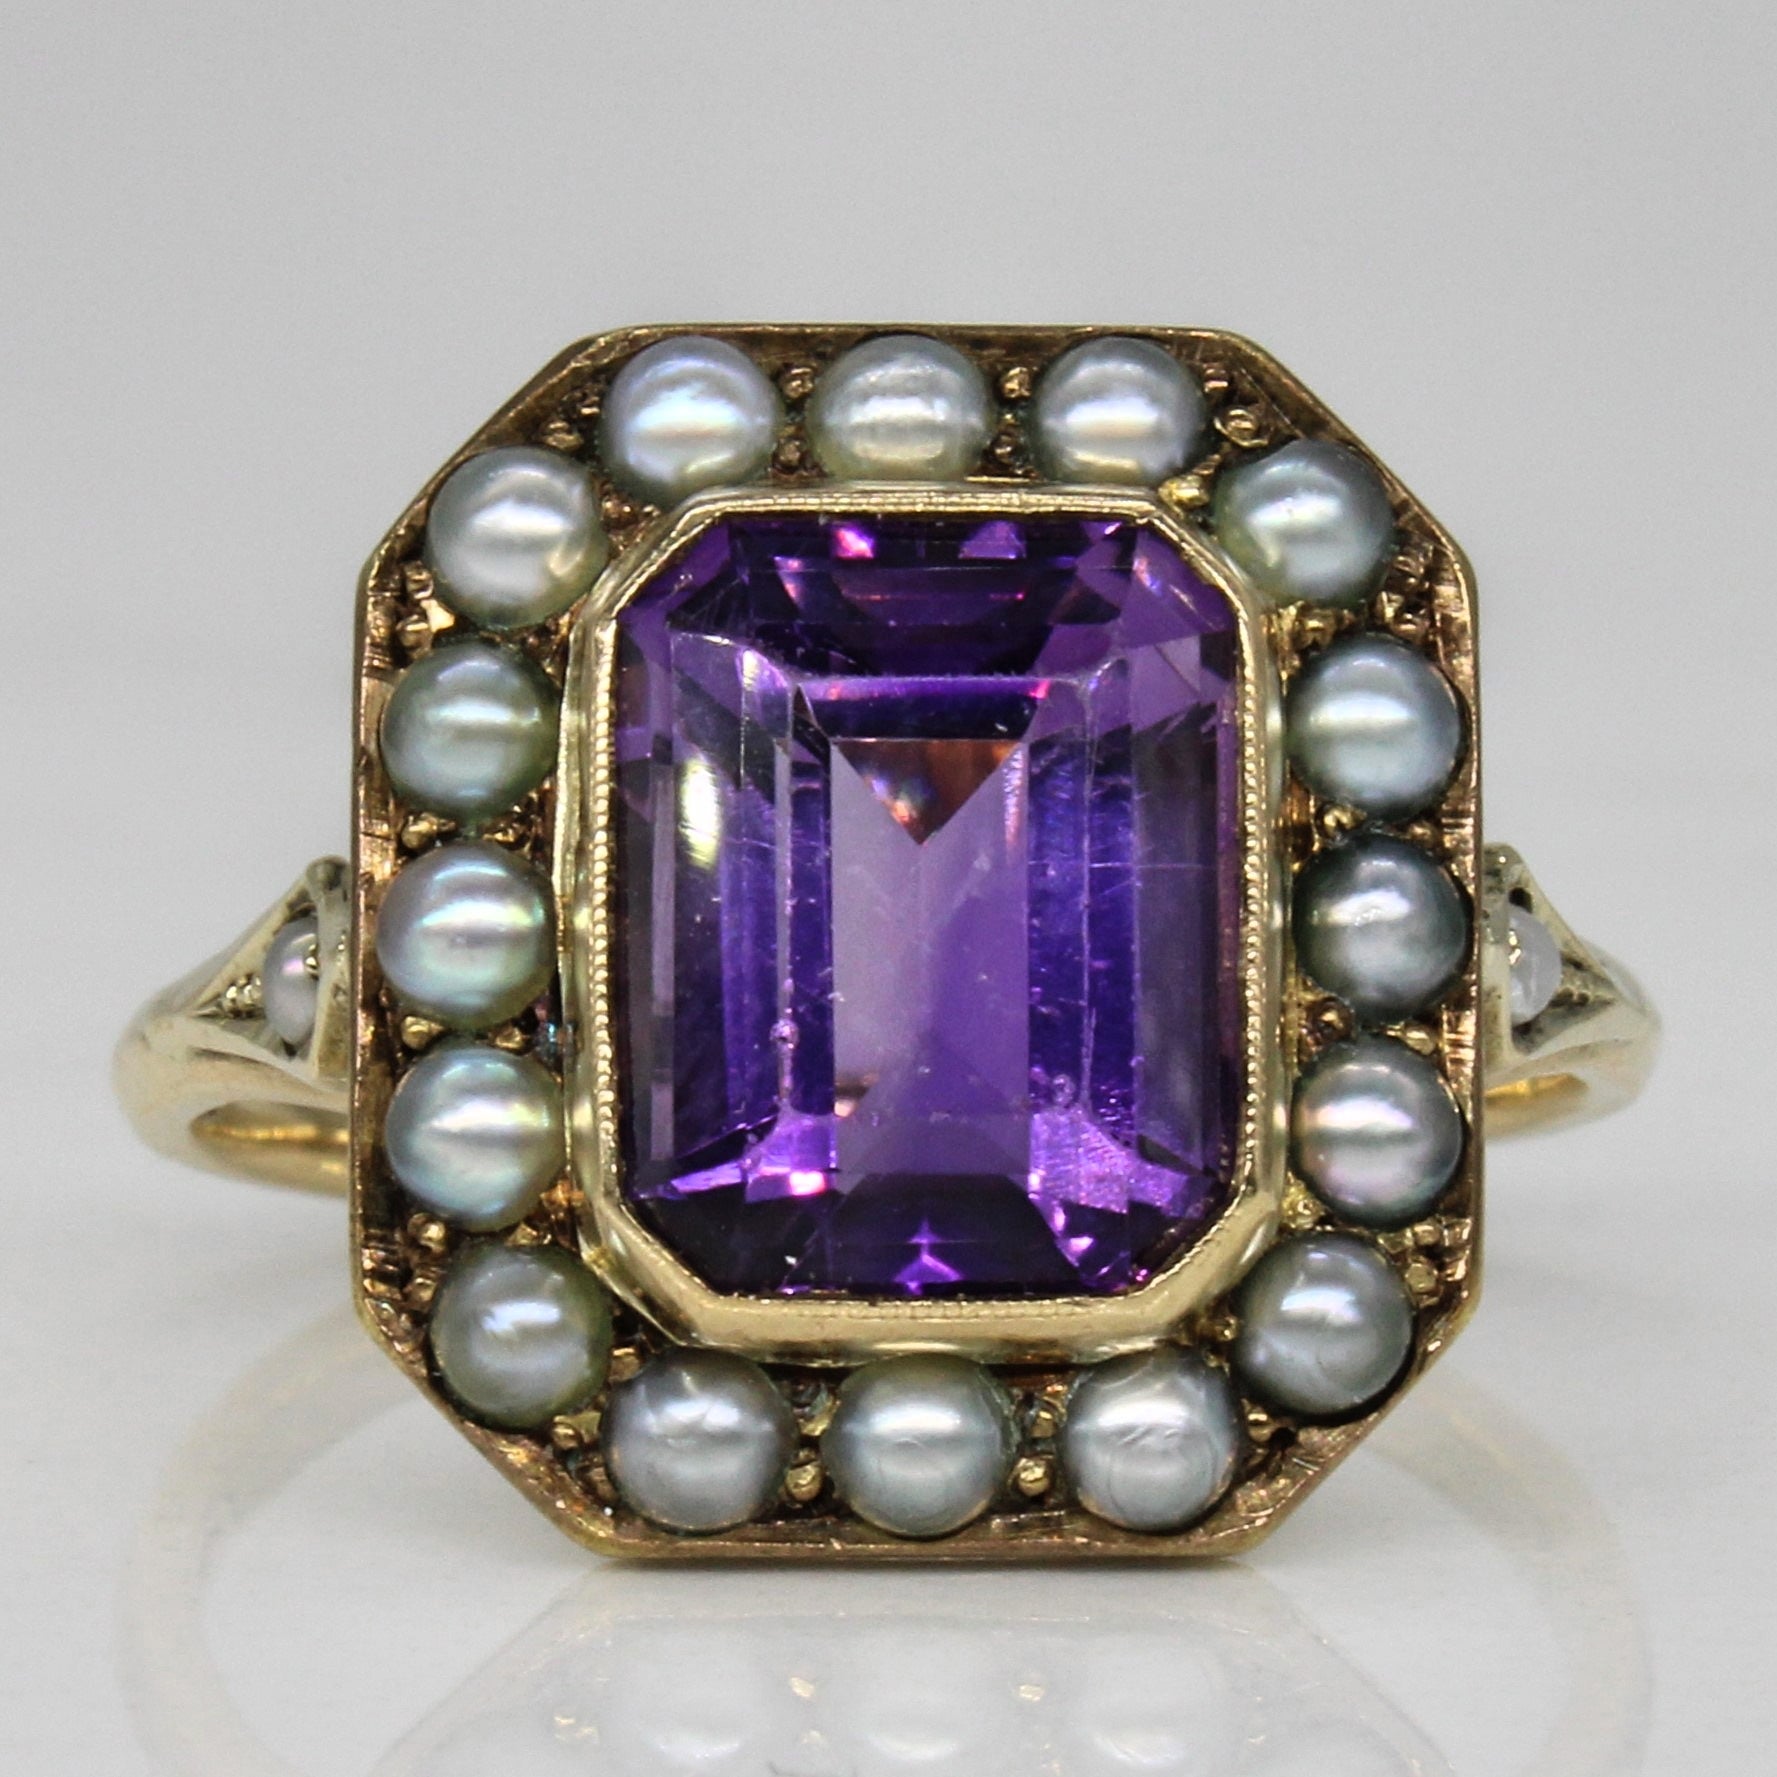 Early 1900s Amethyst & Seed Pearl Cocktail Ring | 3.15ct | SZ 8 |